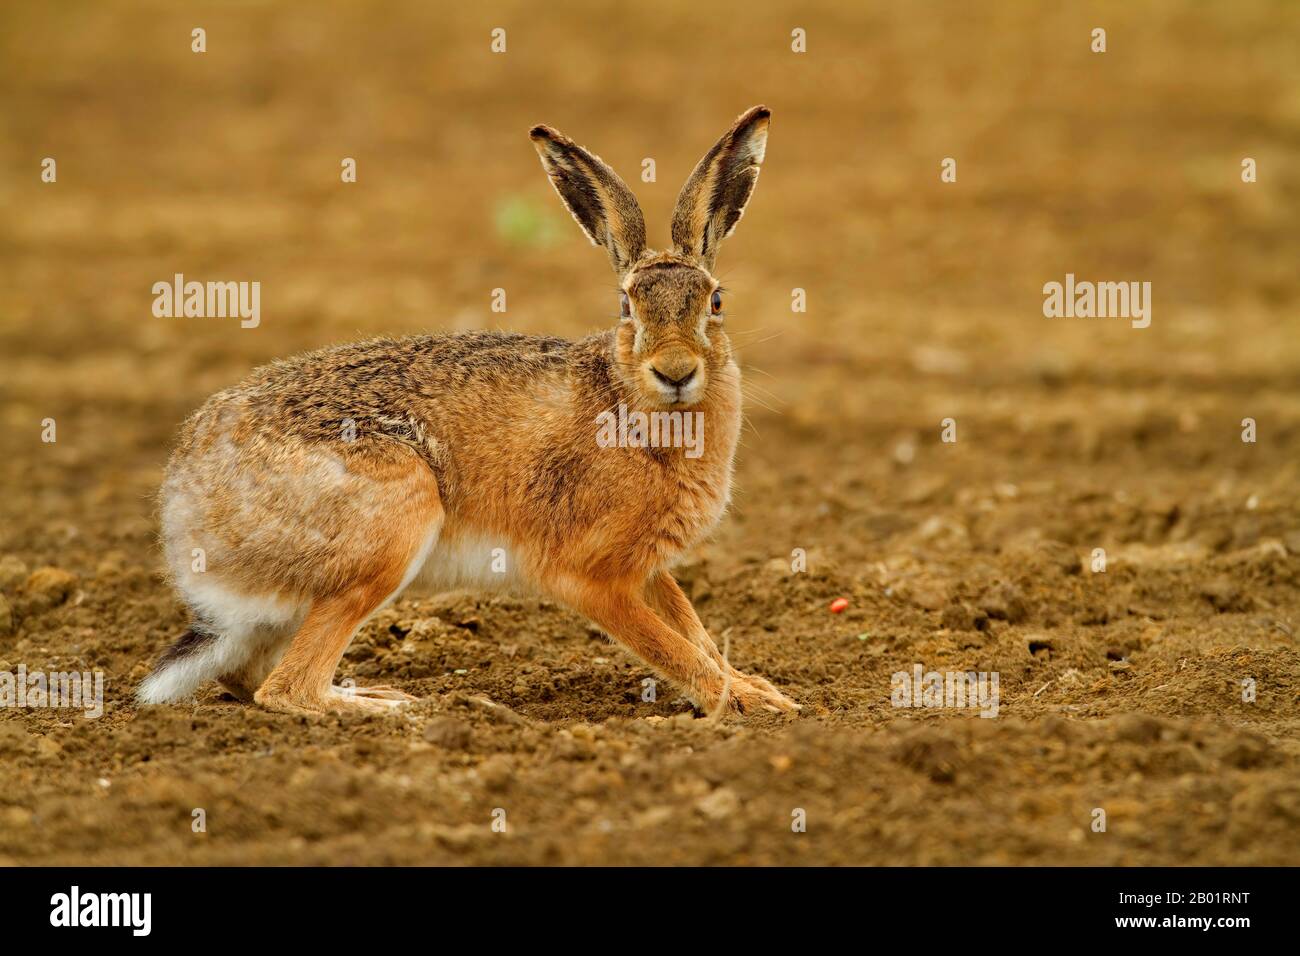 European hare, Brown hare (Lepus europaeus), blind on the right eye, crouching on an acre, Germany, North Rhine-Westphalia Stock Photo